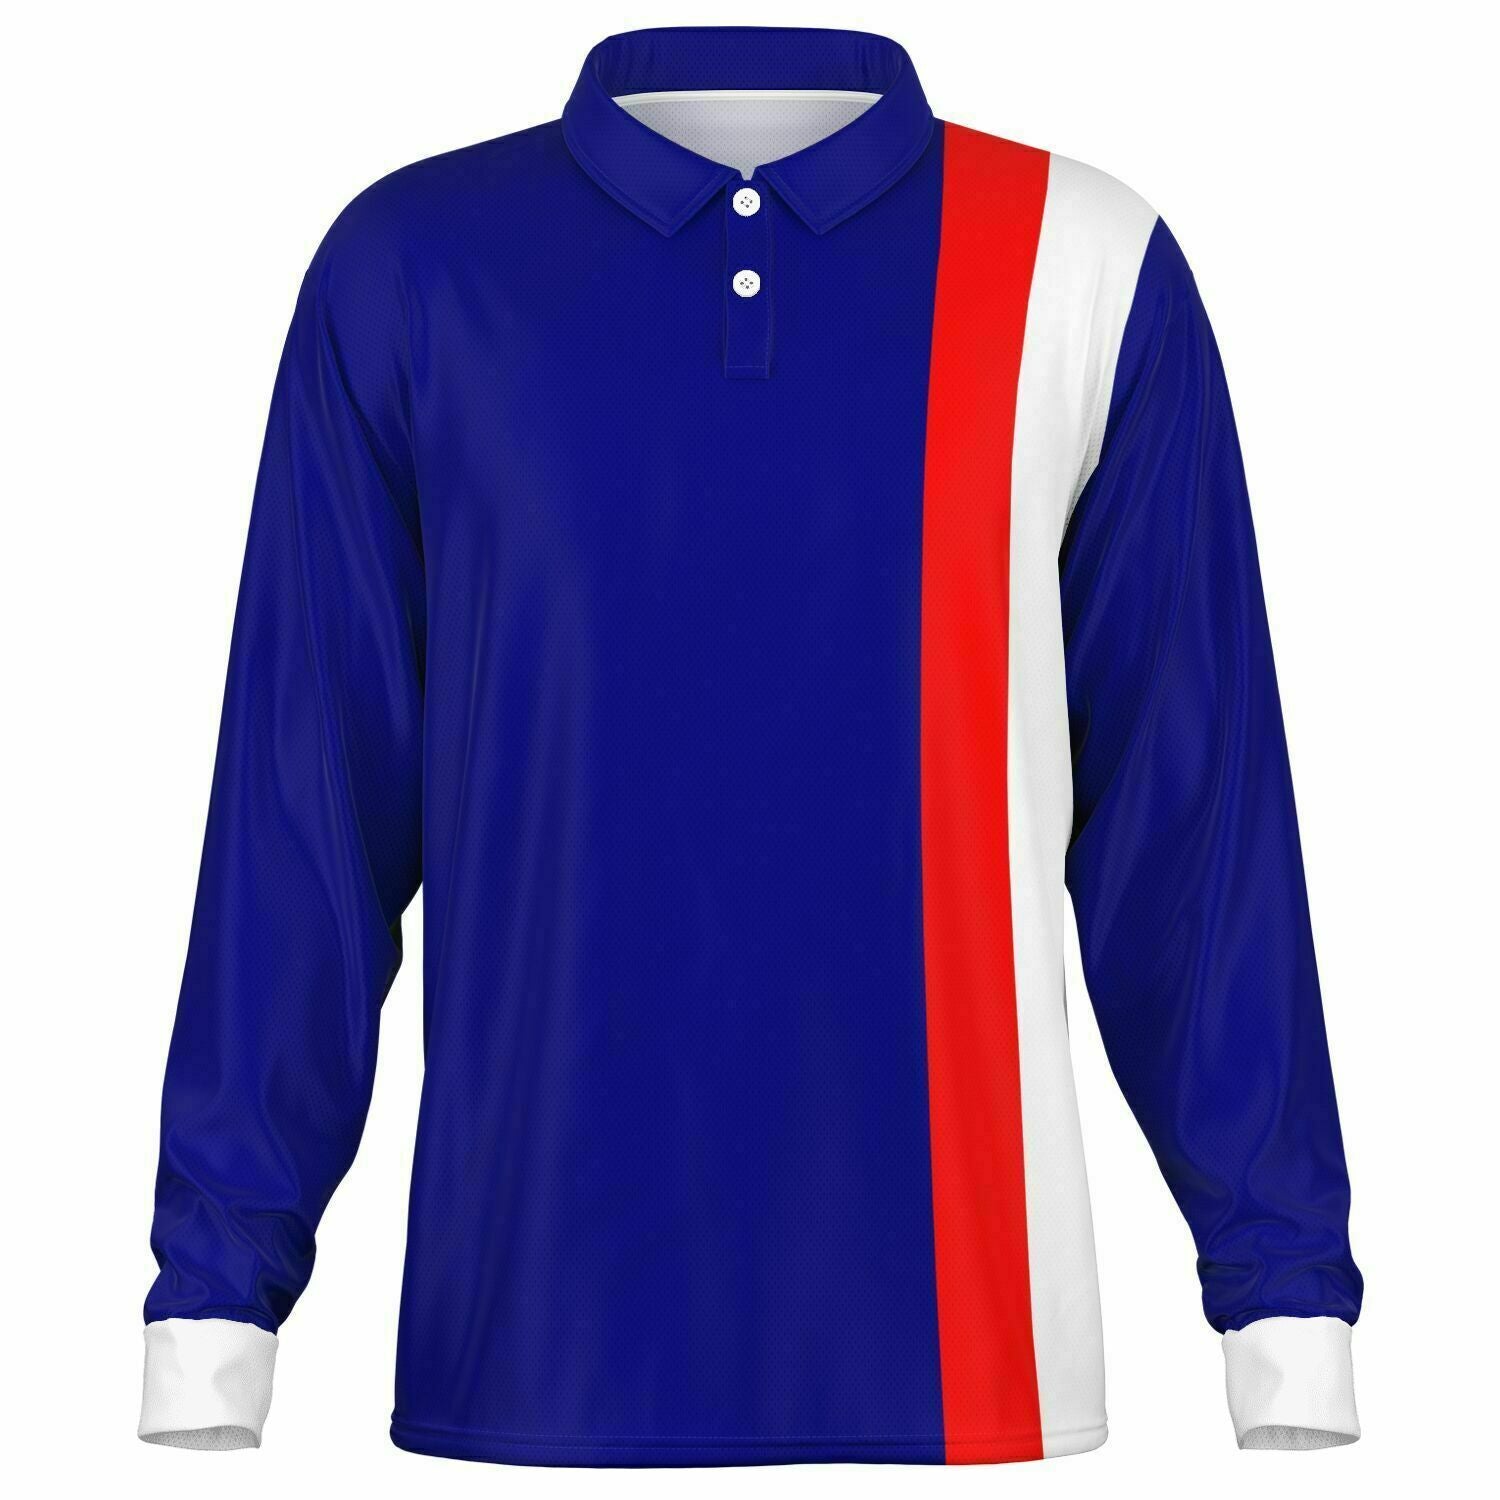 ESCAPE TO VICTORY INSPIRED BLUE TOP